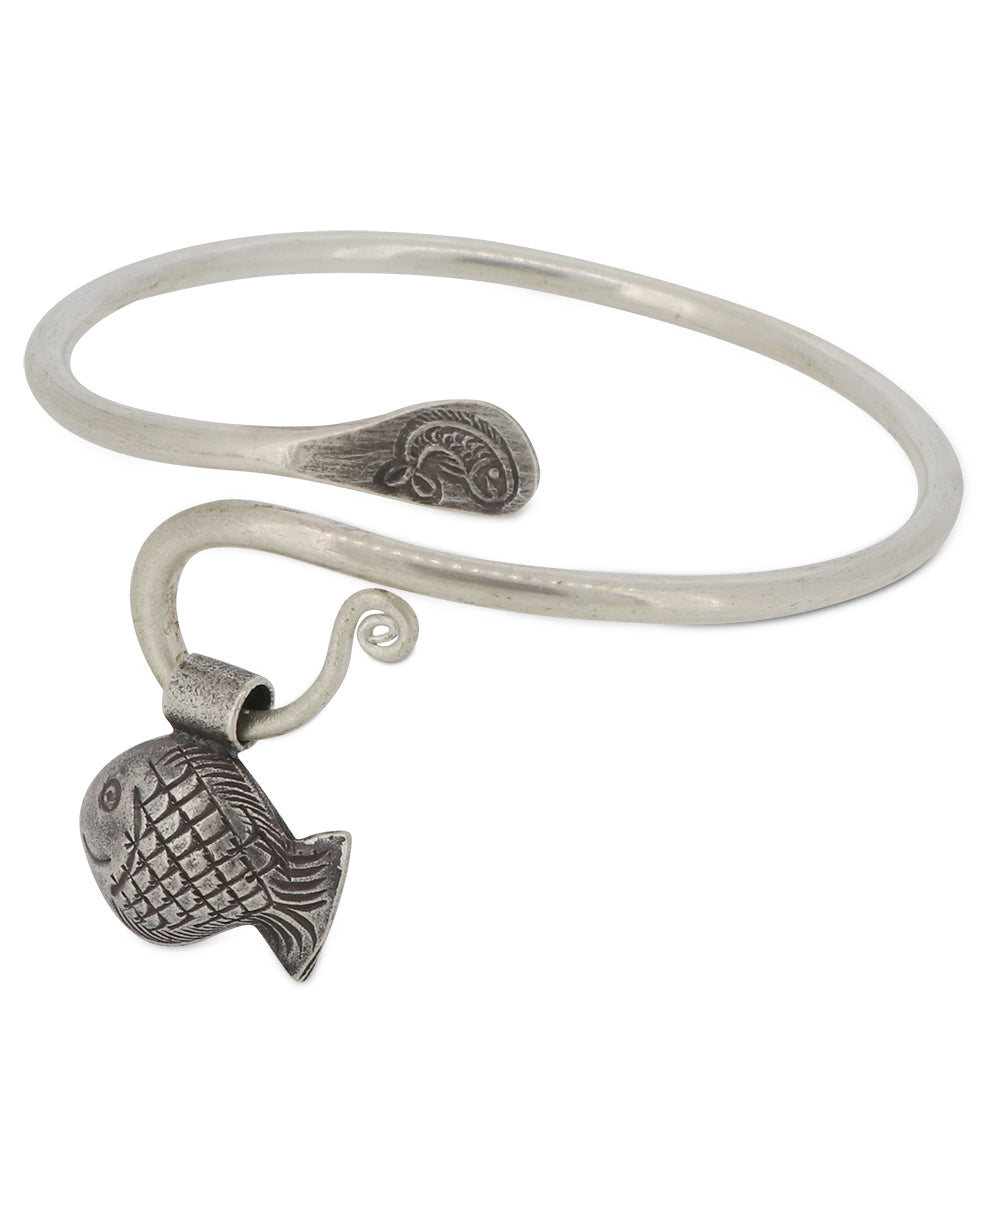 Adjustable Thai Hilltribe Silver Bracelet with Dangling Fish Charm